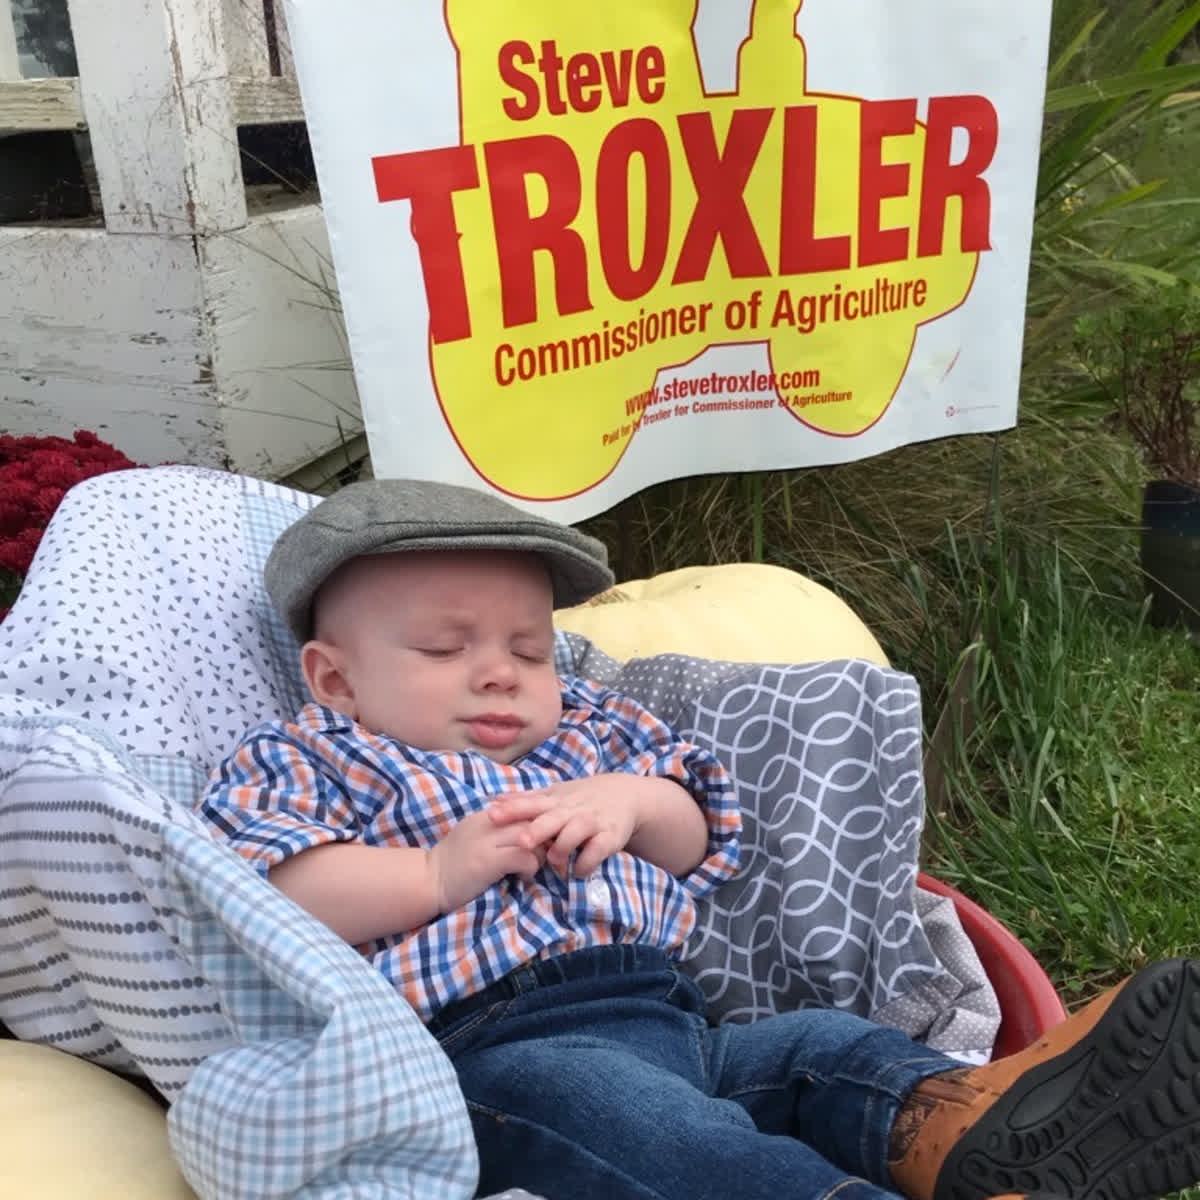 Wait! It’s not time for a nap just yet! Get out and vote for Steve Troxler today! #NCAgriculture